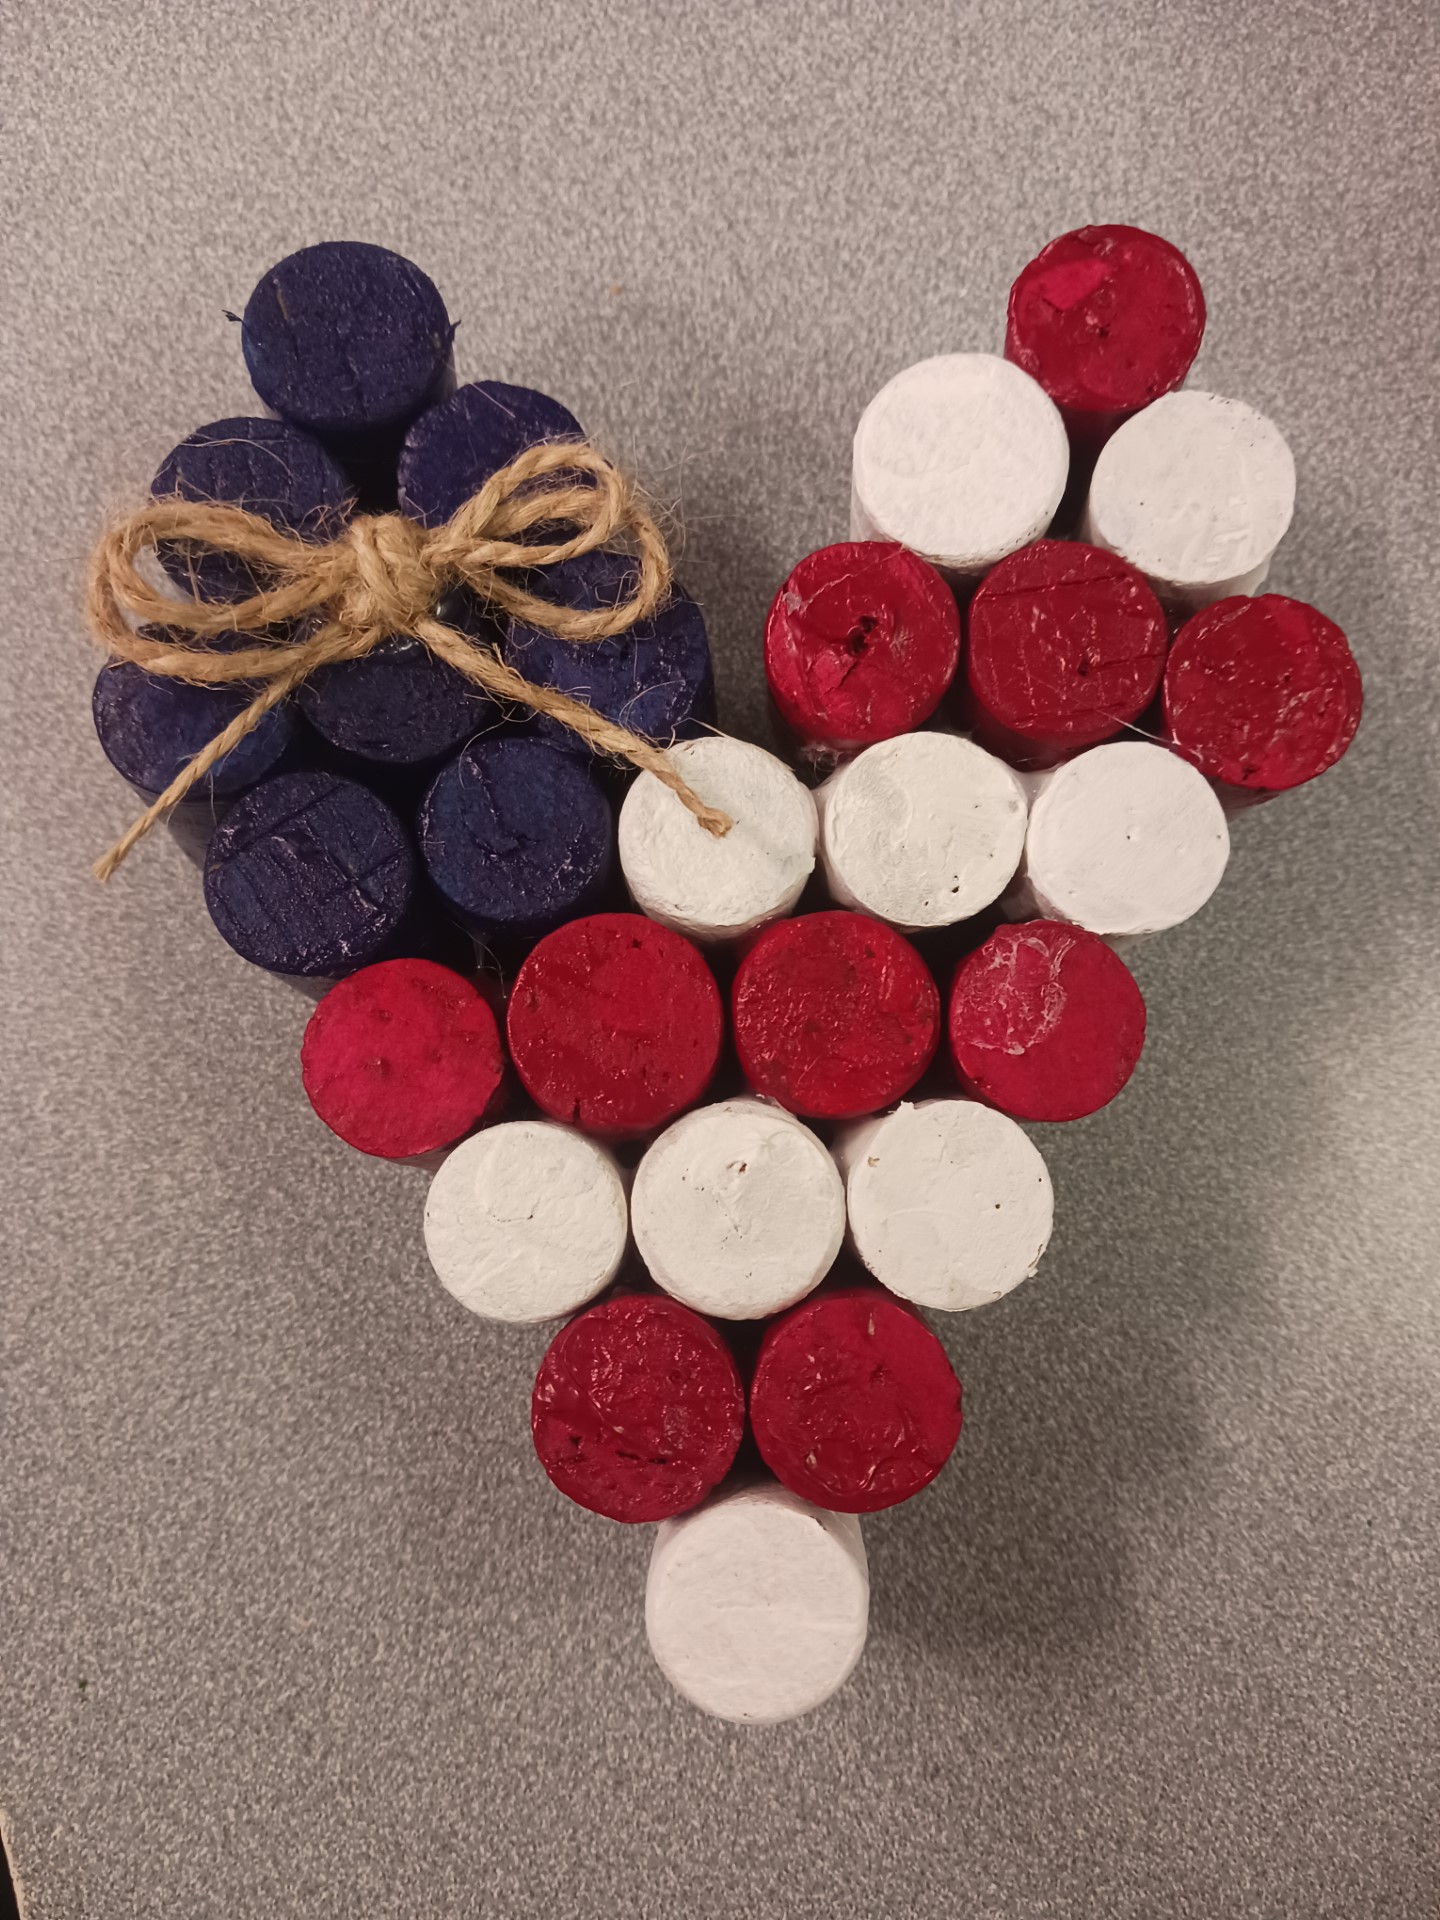 Celebrate summer and America's Birthday with us by making this patriotic wine cork heart!